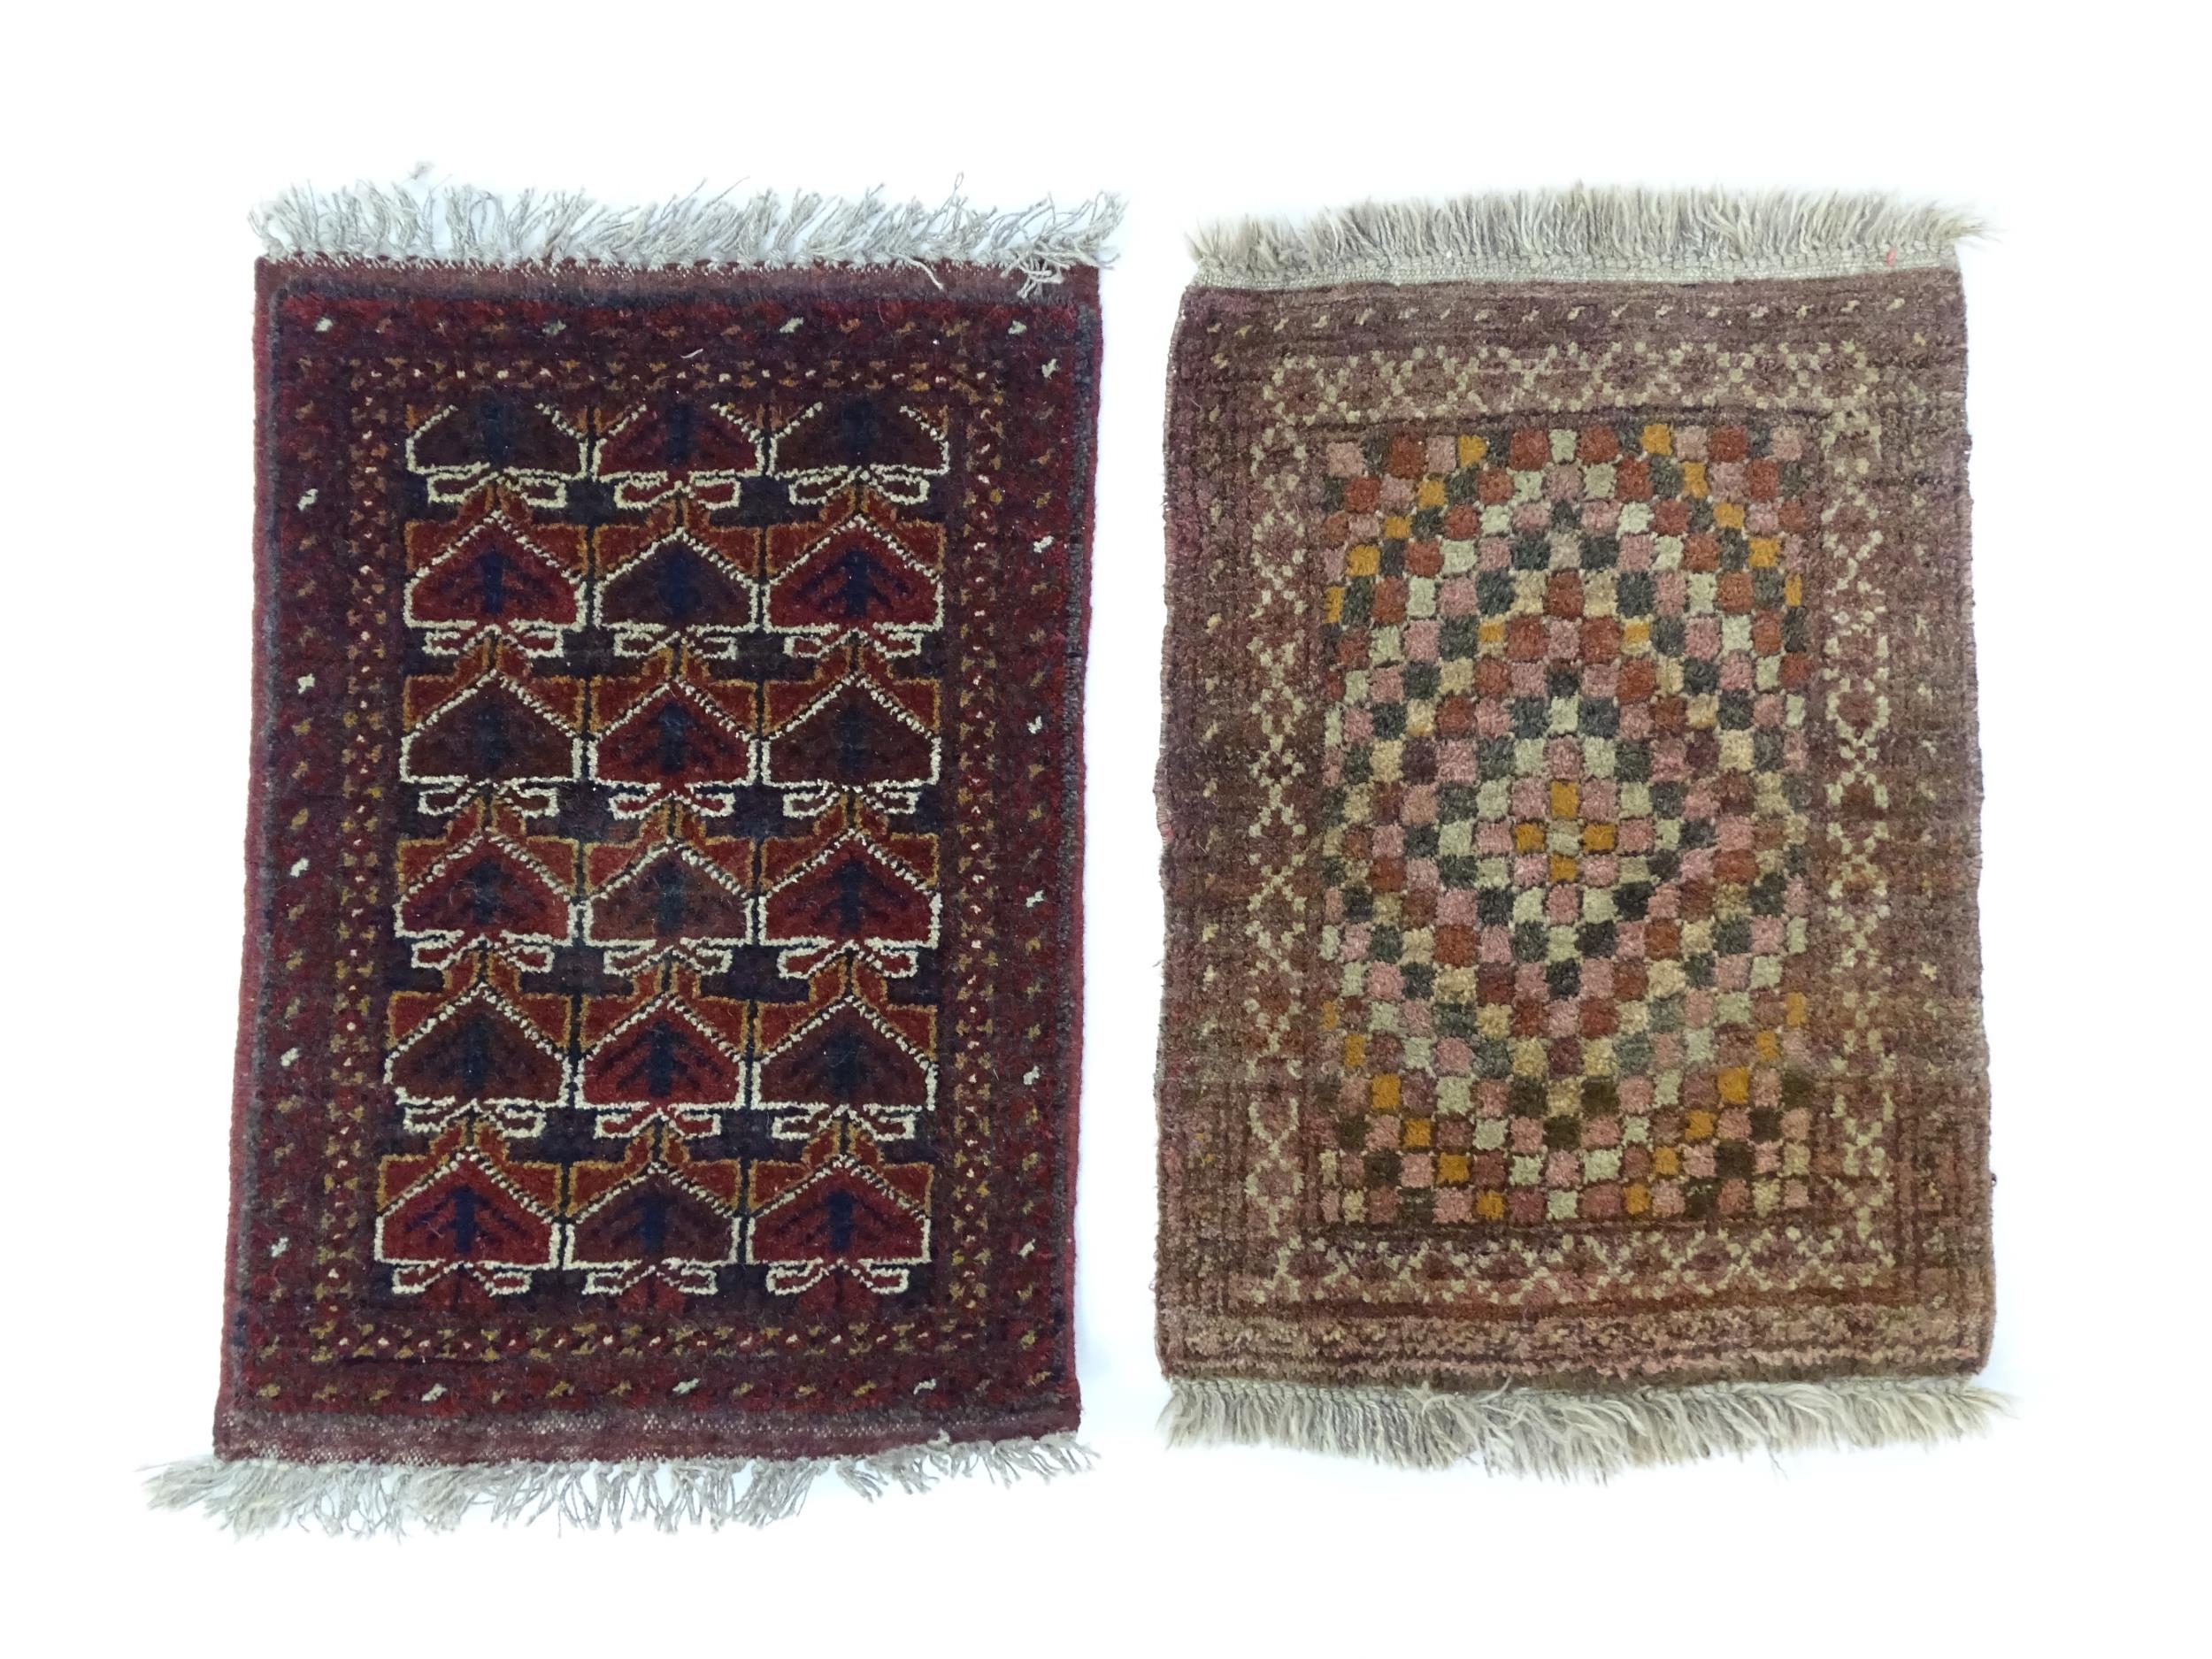 Carpets / Rugs: Two small rugs, one with burgundy ground with repeating motifs, the other with